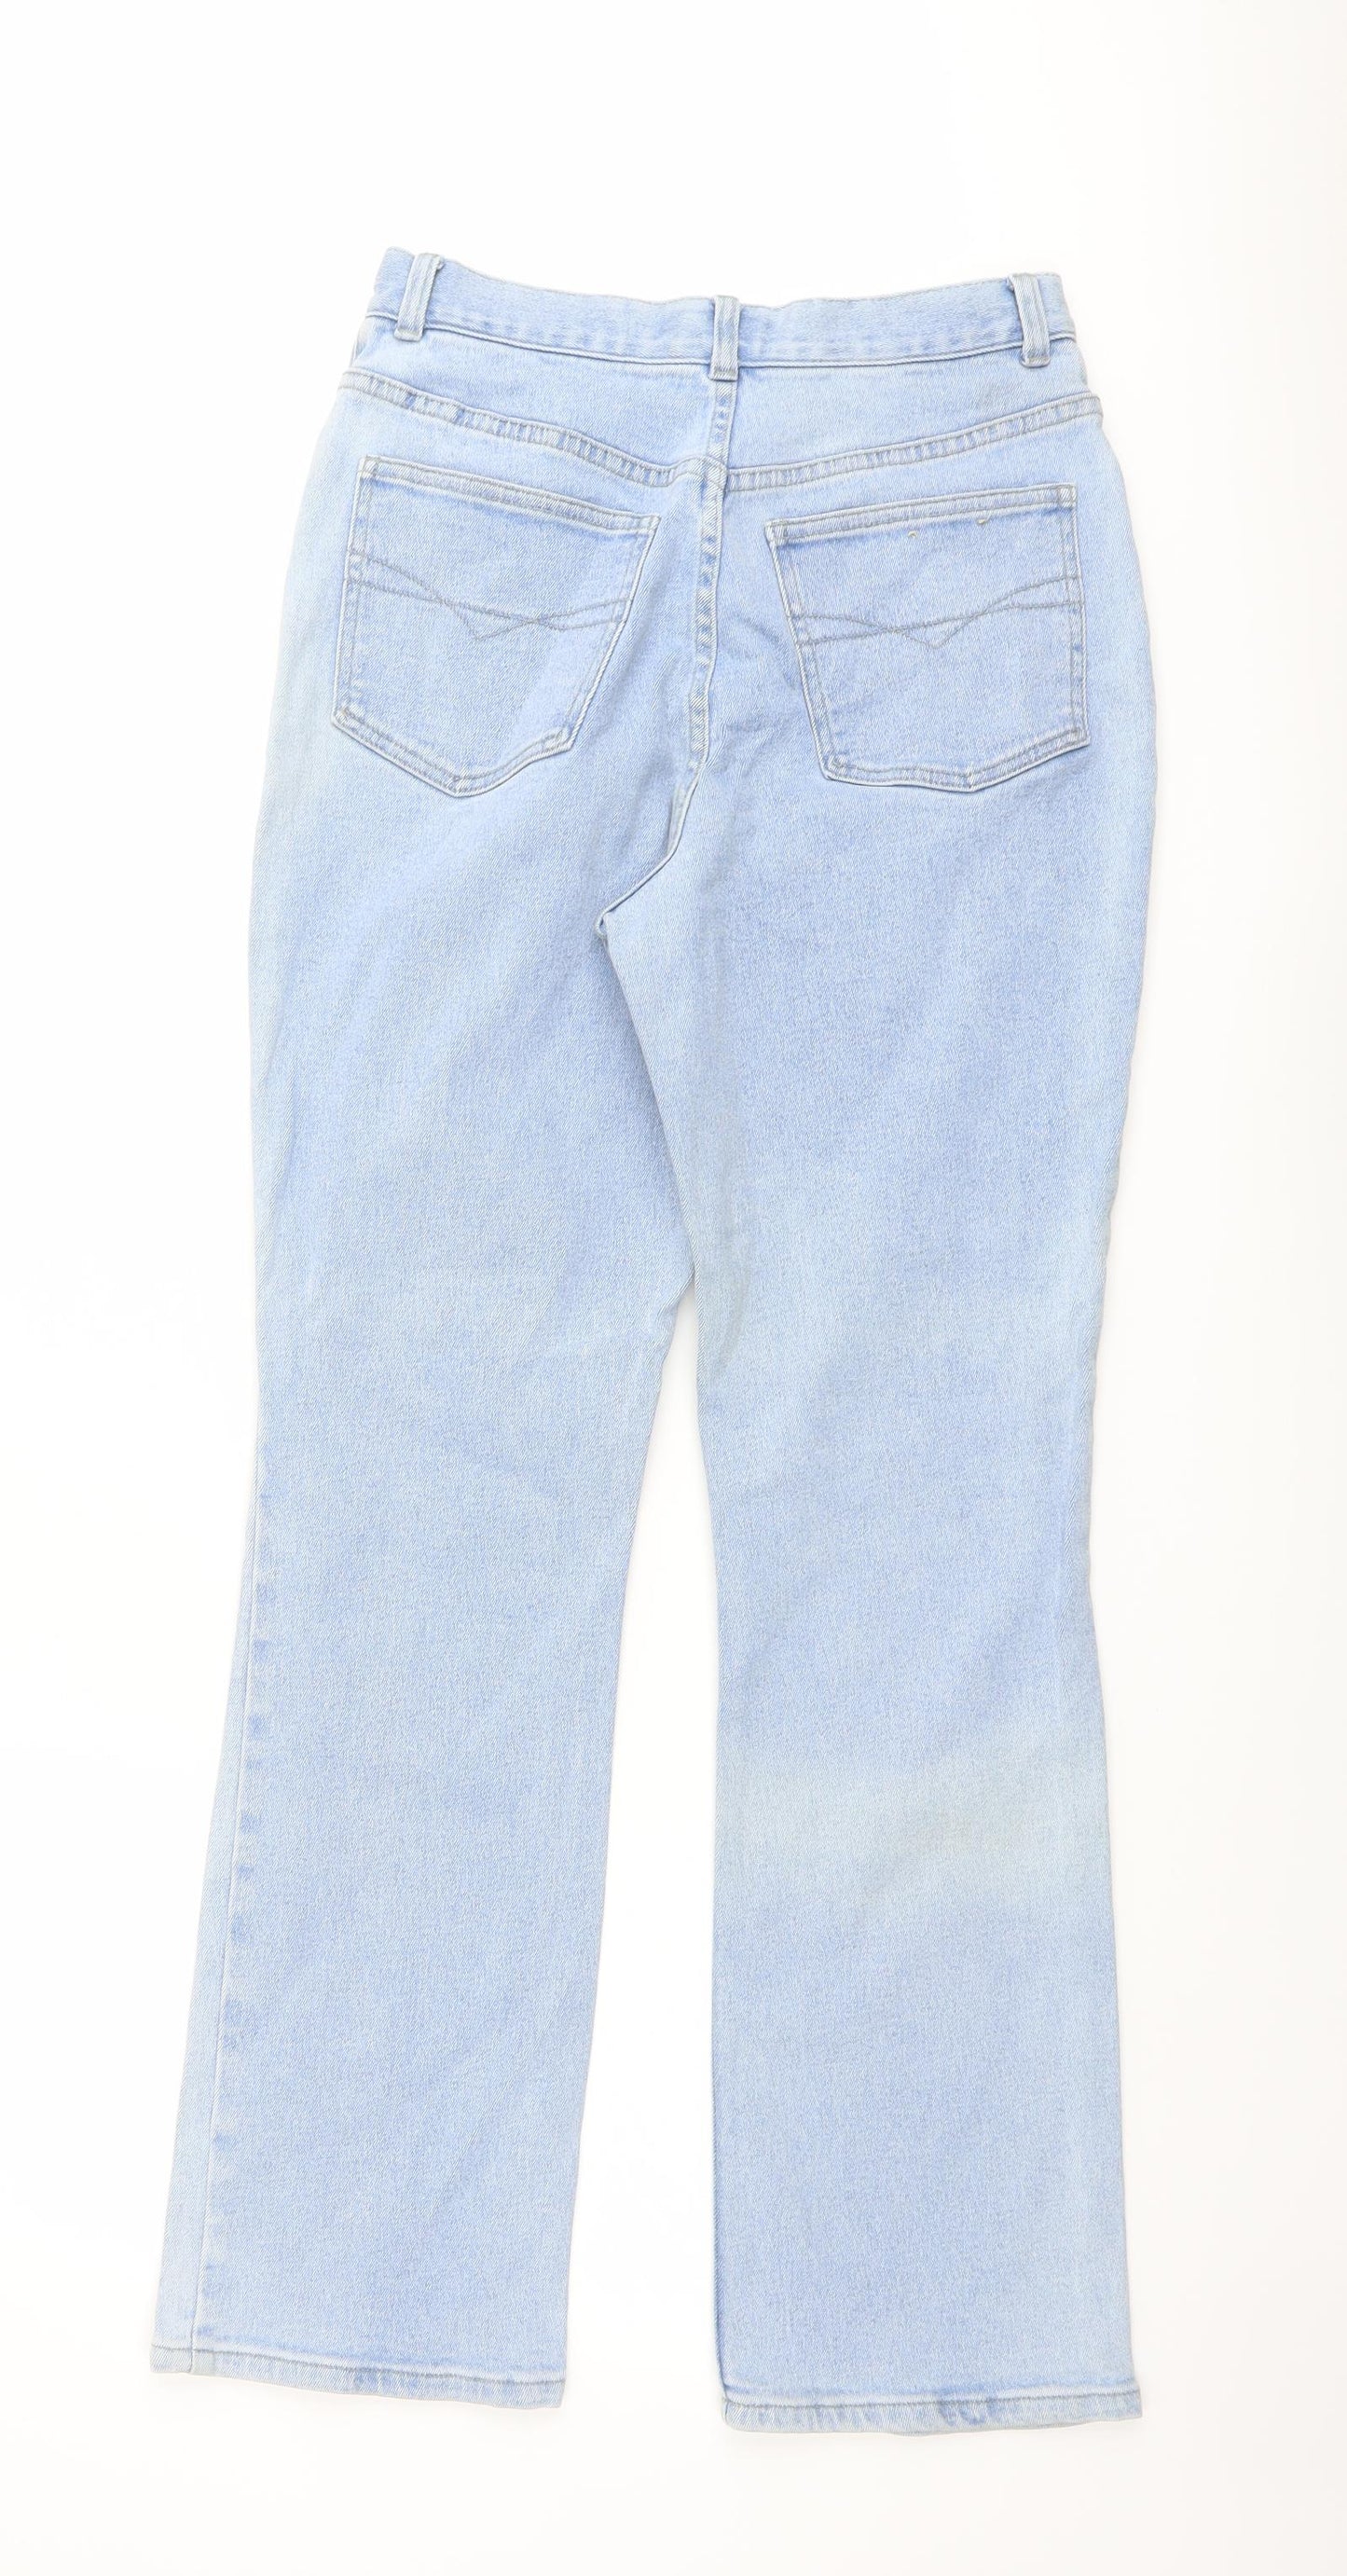 Blue Star Womens Blue Cotton Bootcut Jeans Size 12 L30 in Regular Button